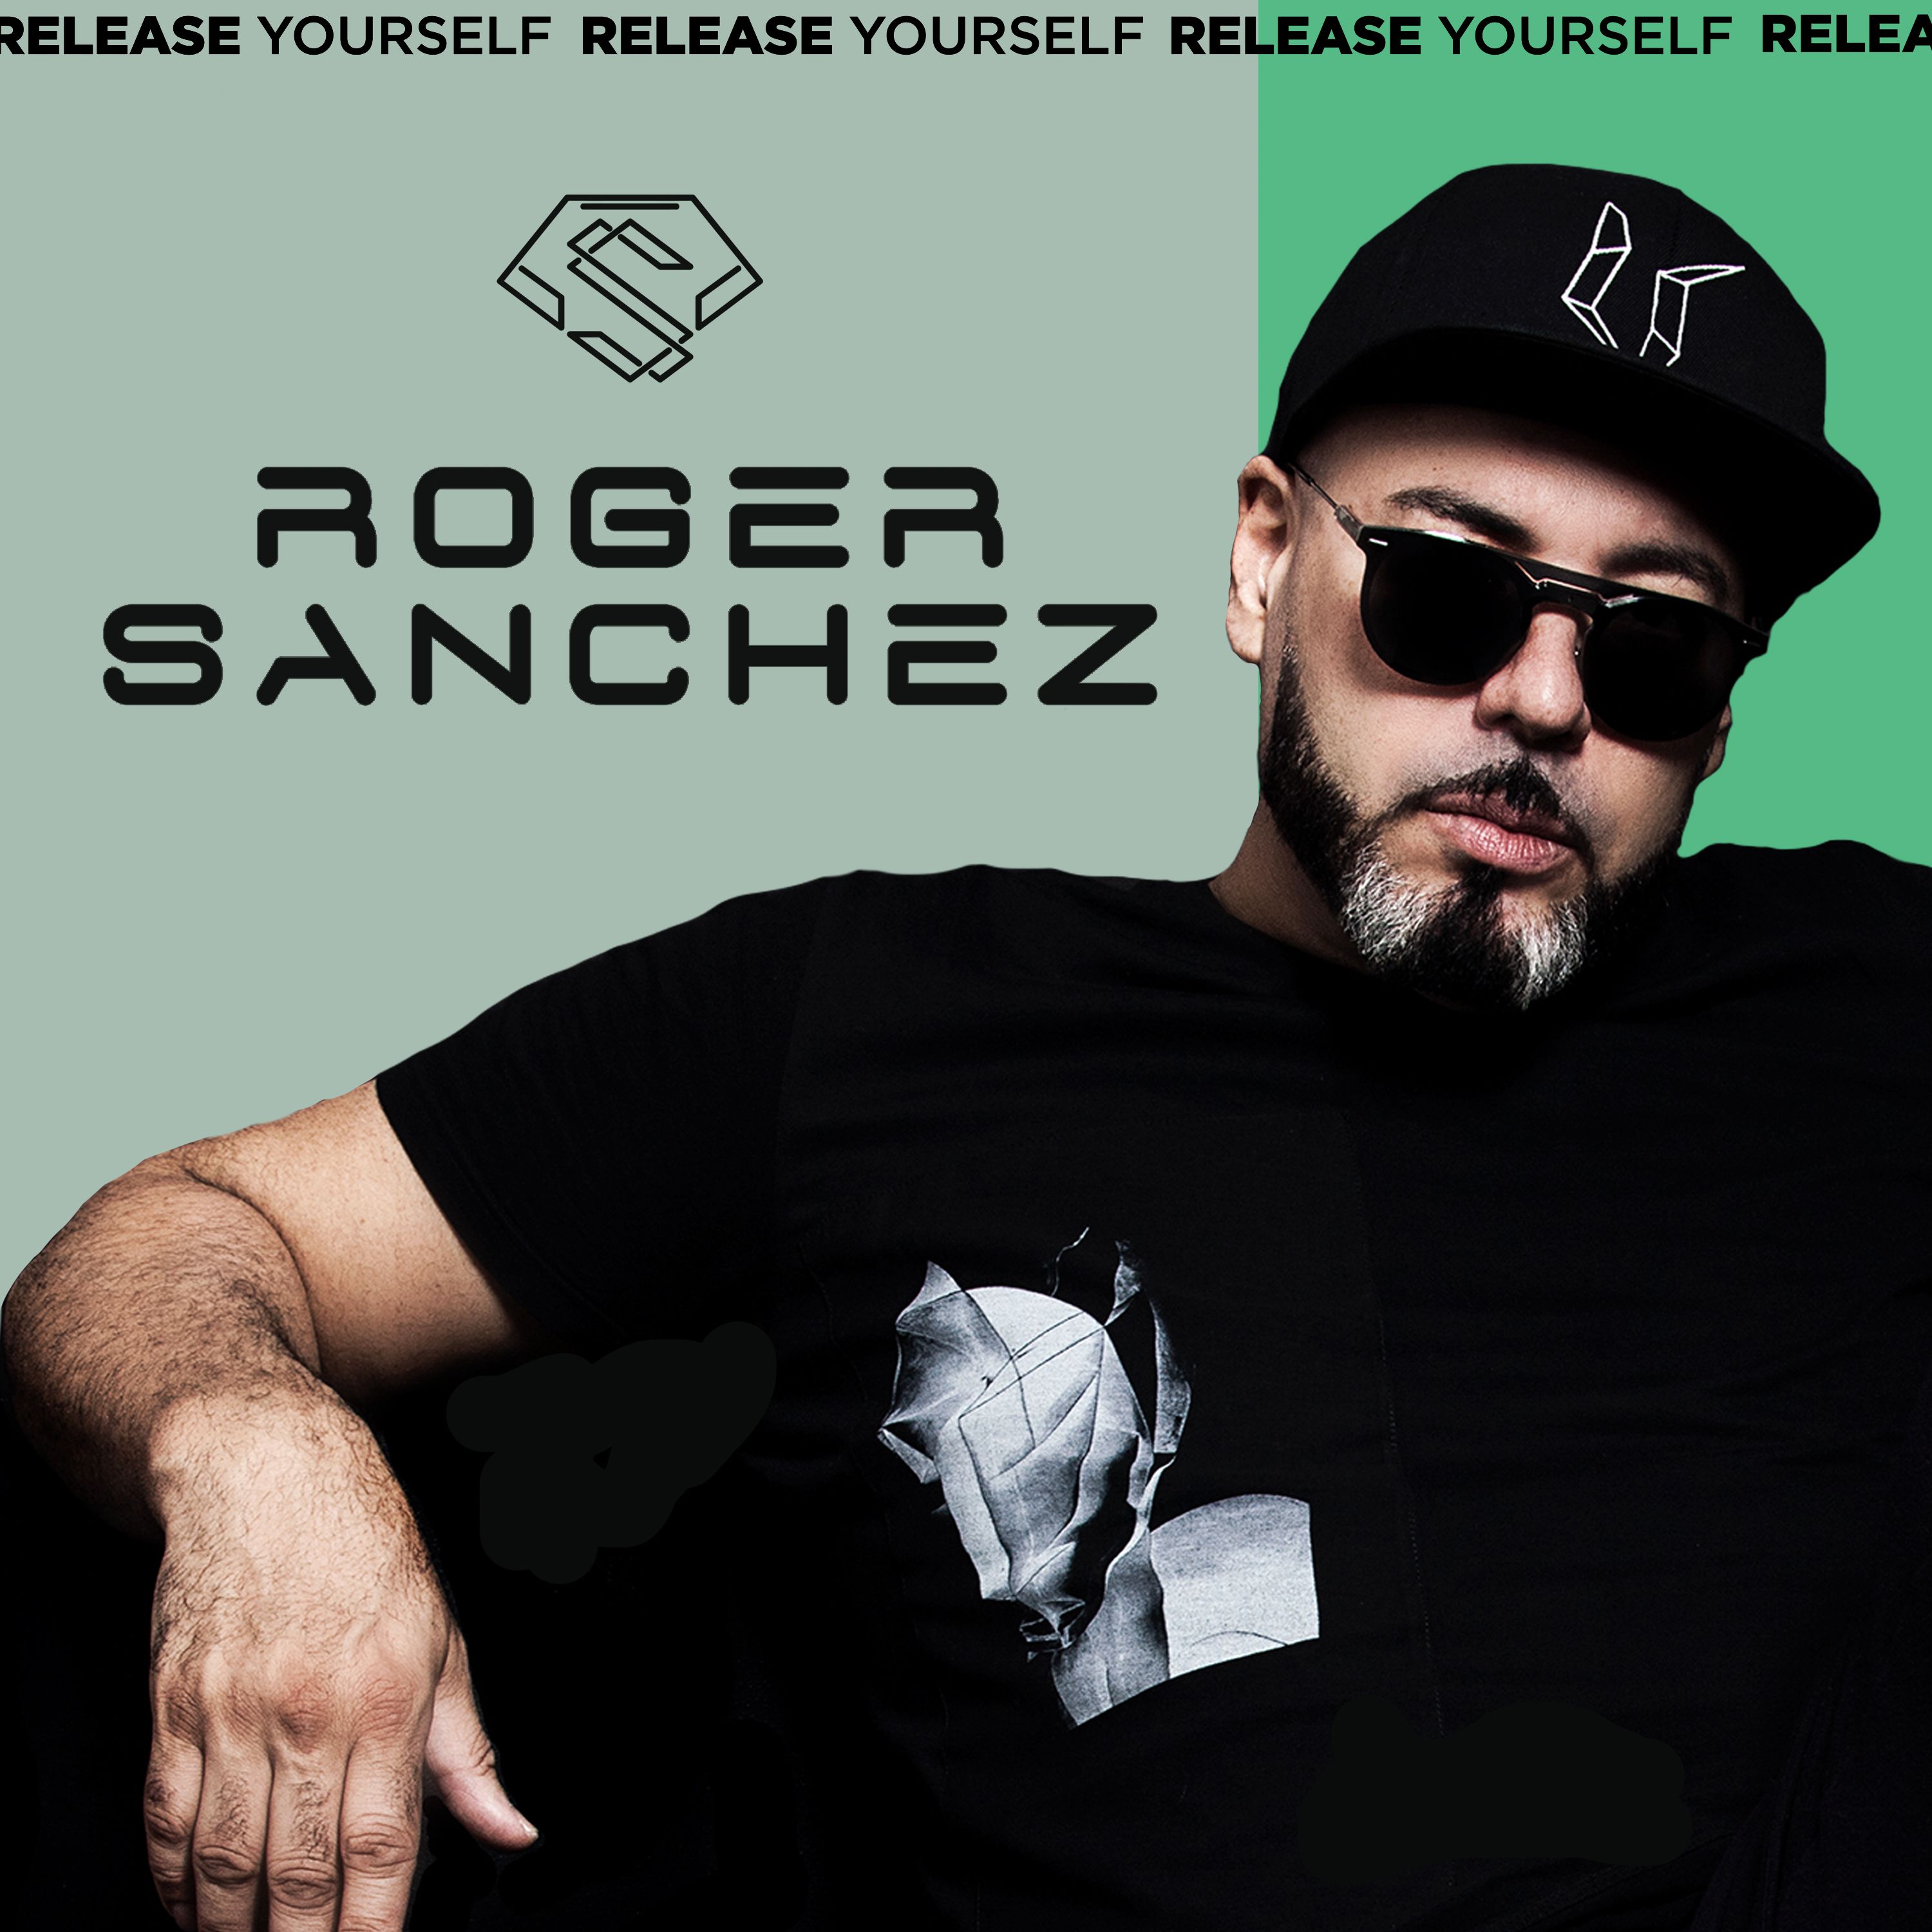 Release Yourself Radio Show #1047 - Roger Sanchez Live In the Mix from Duplex, Prague